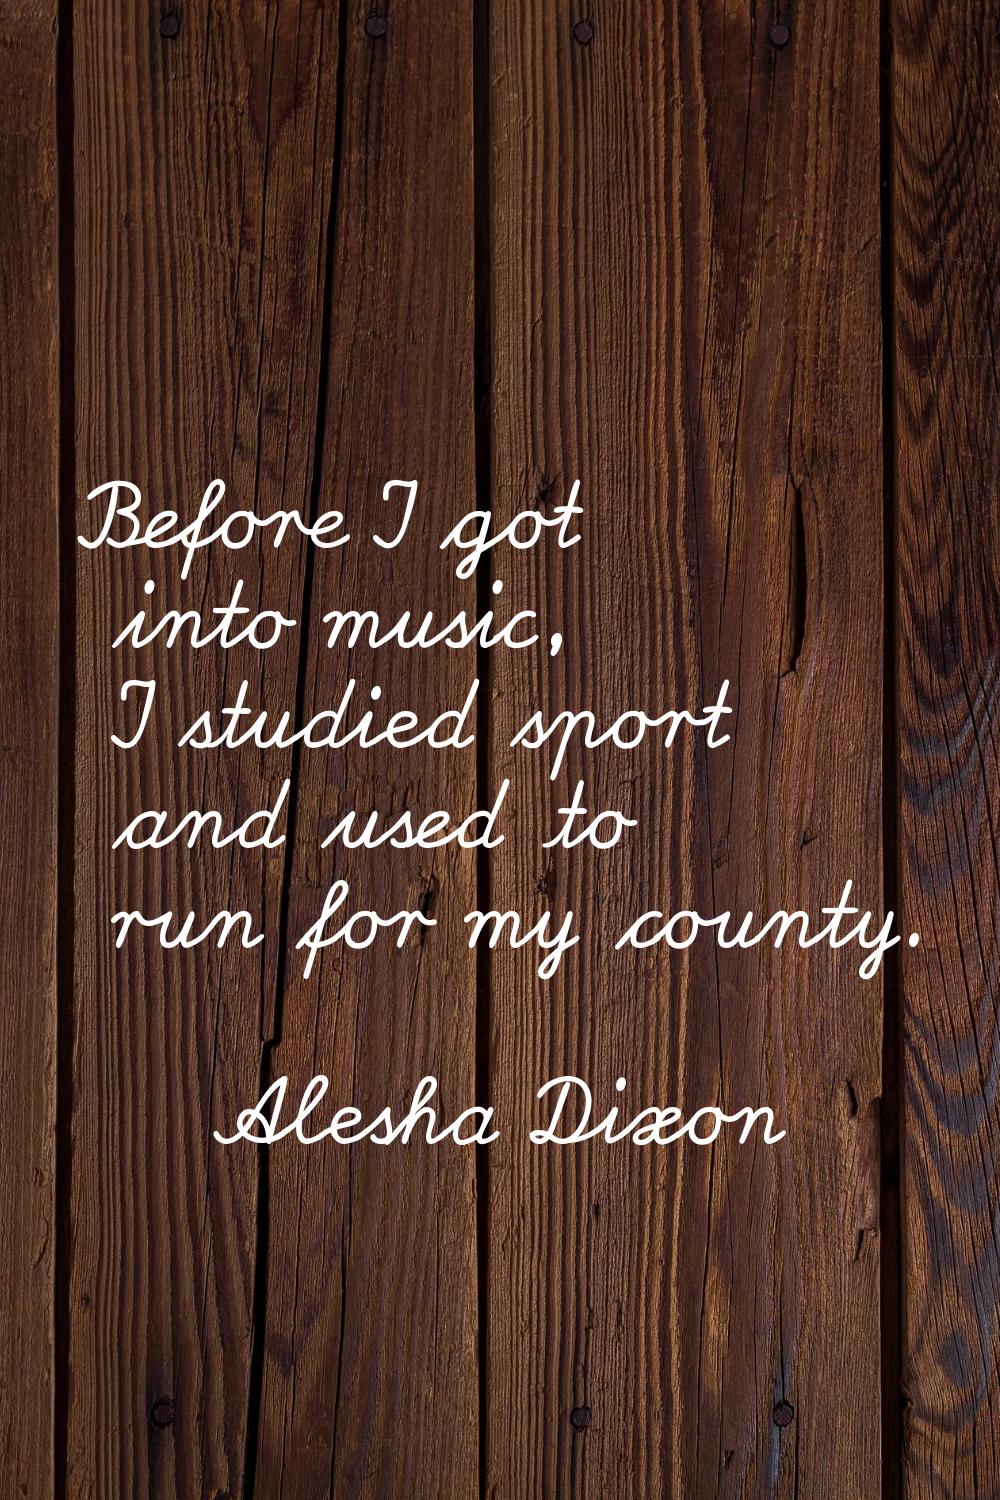 Before I got into music, I studied sport and used to run for my county.